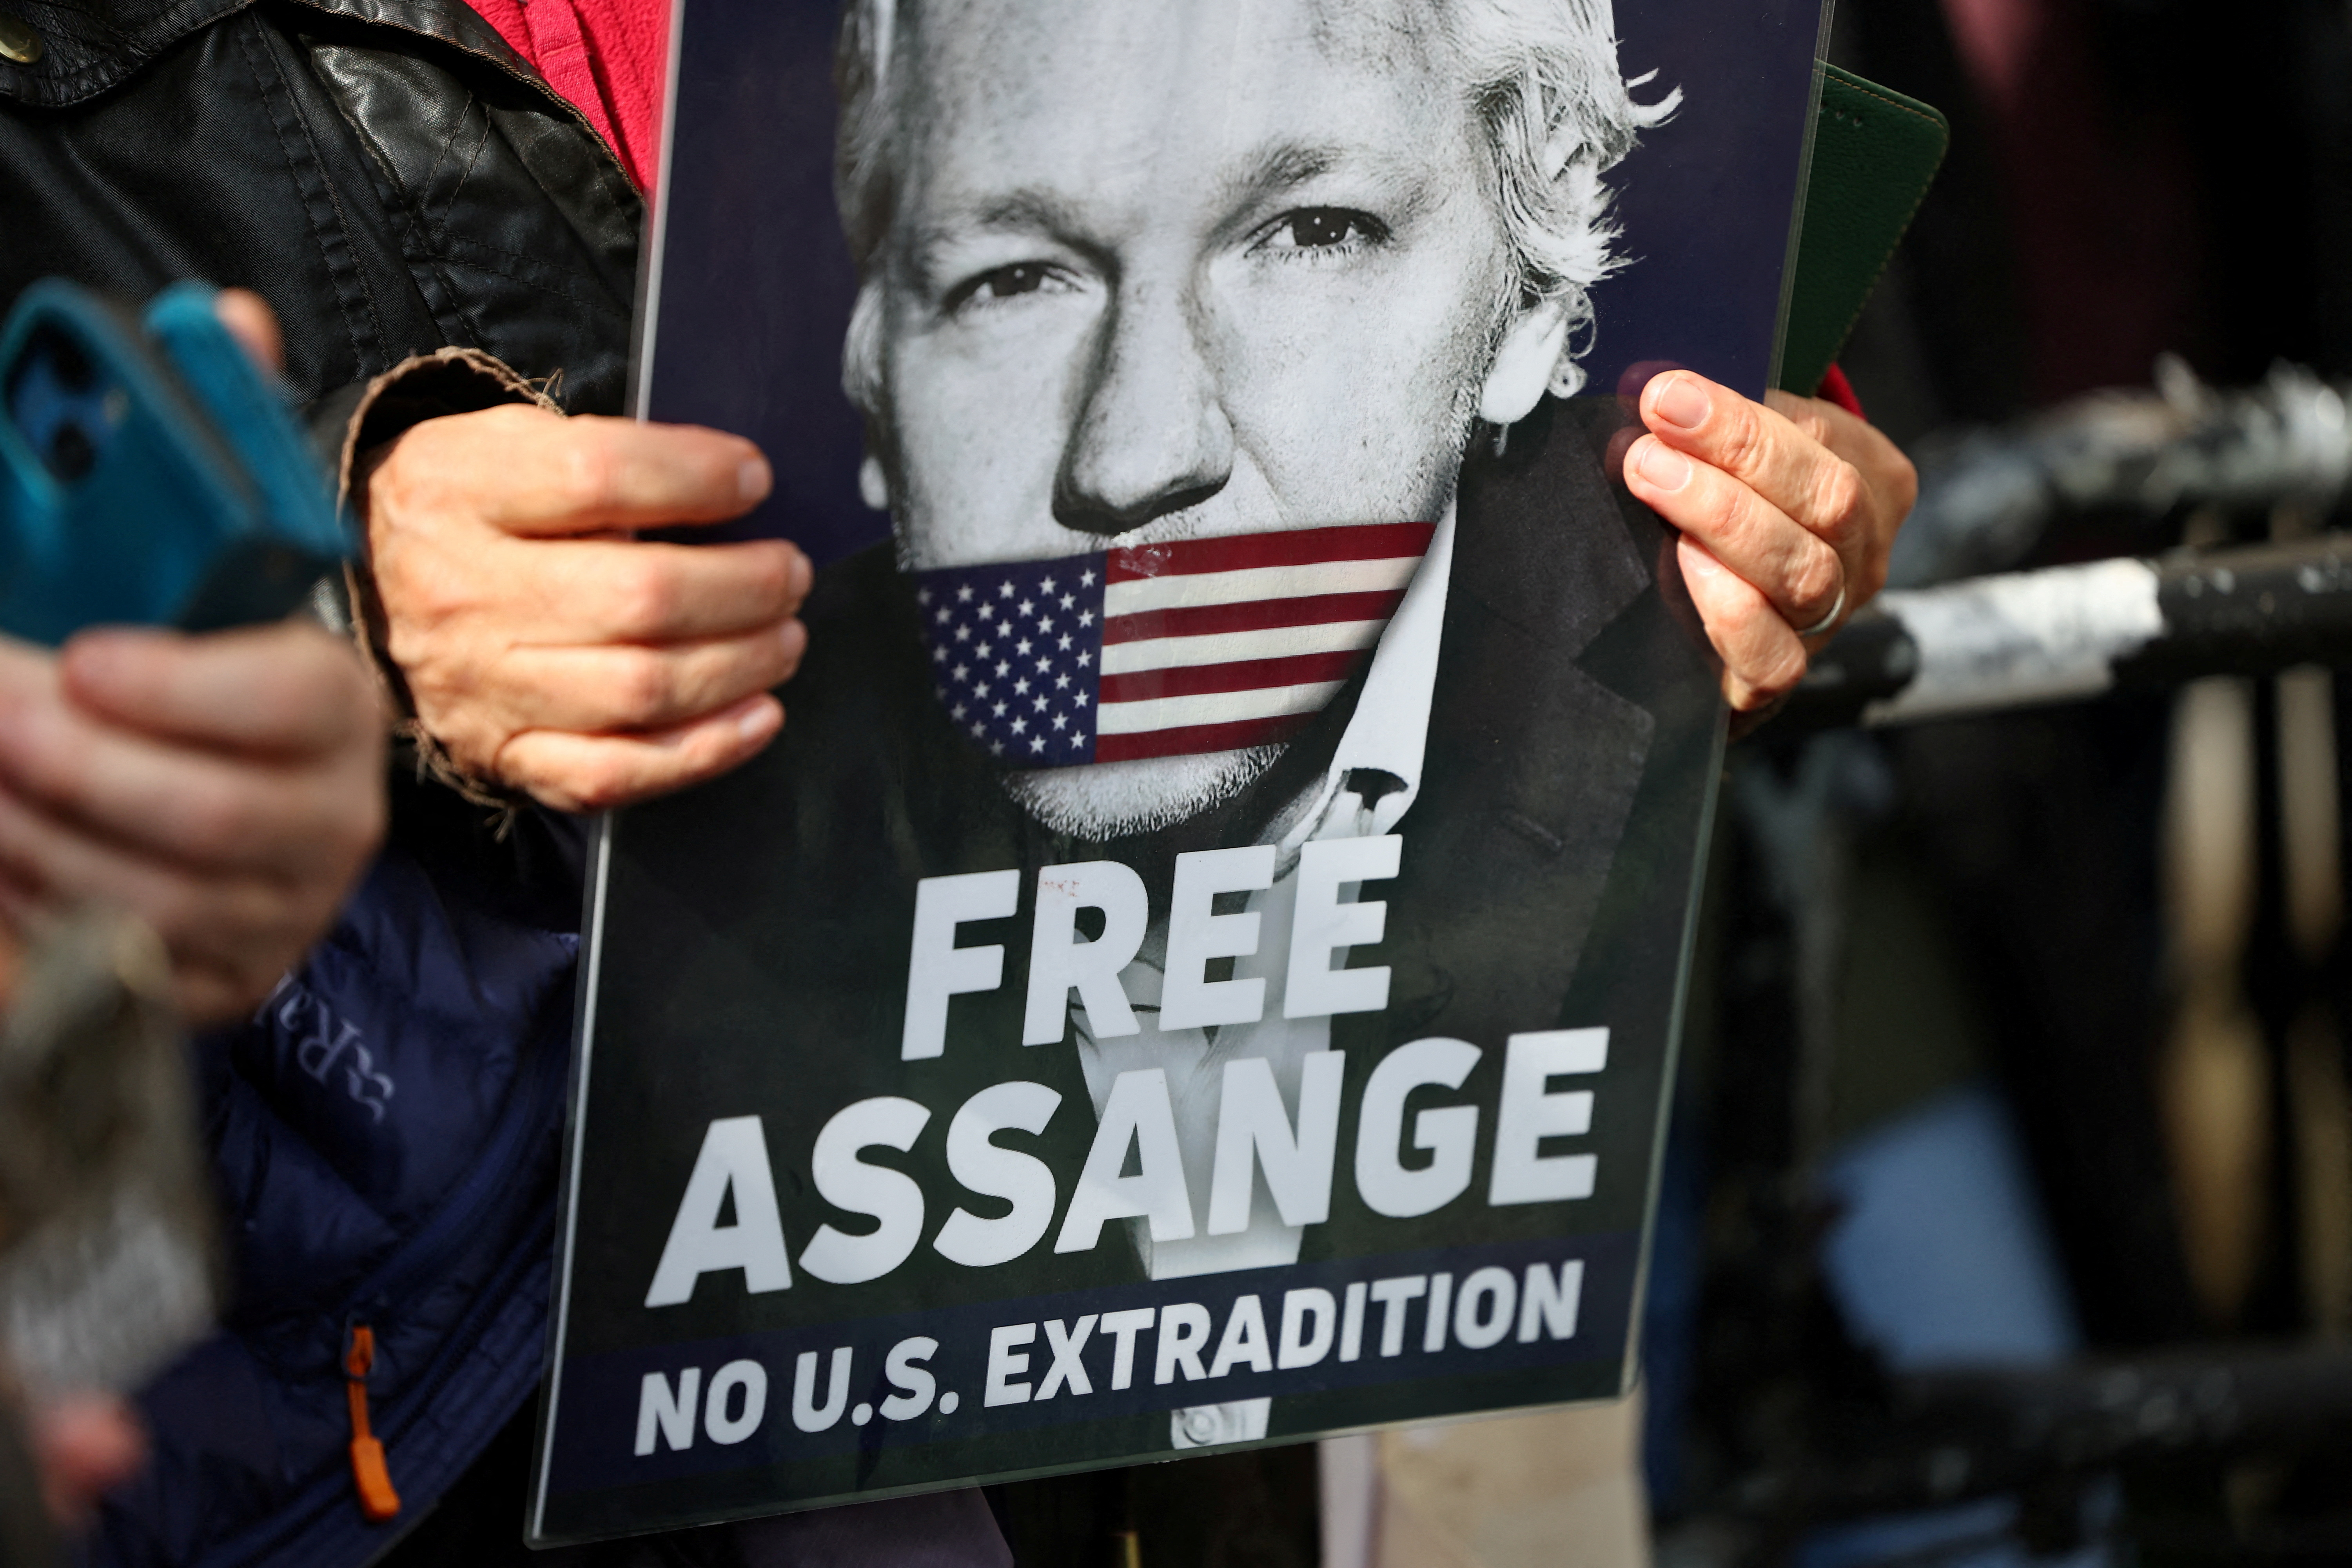 Julian Assange's supporters say there's very little chance he will get a fair trial if he's sent to the U.S. /Toby Melville/Reuters
